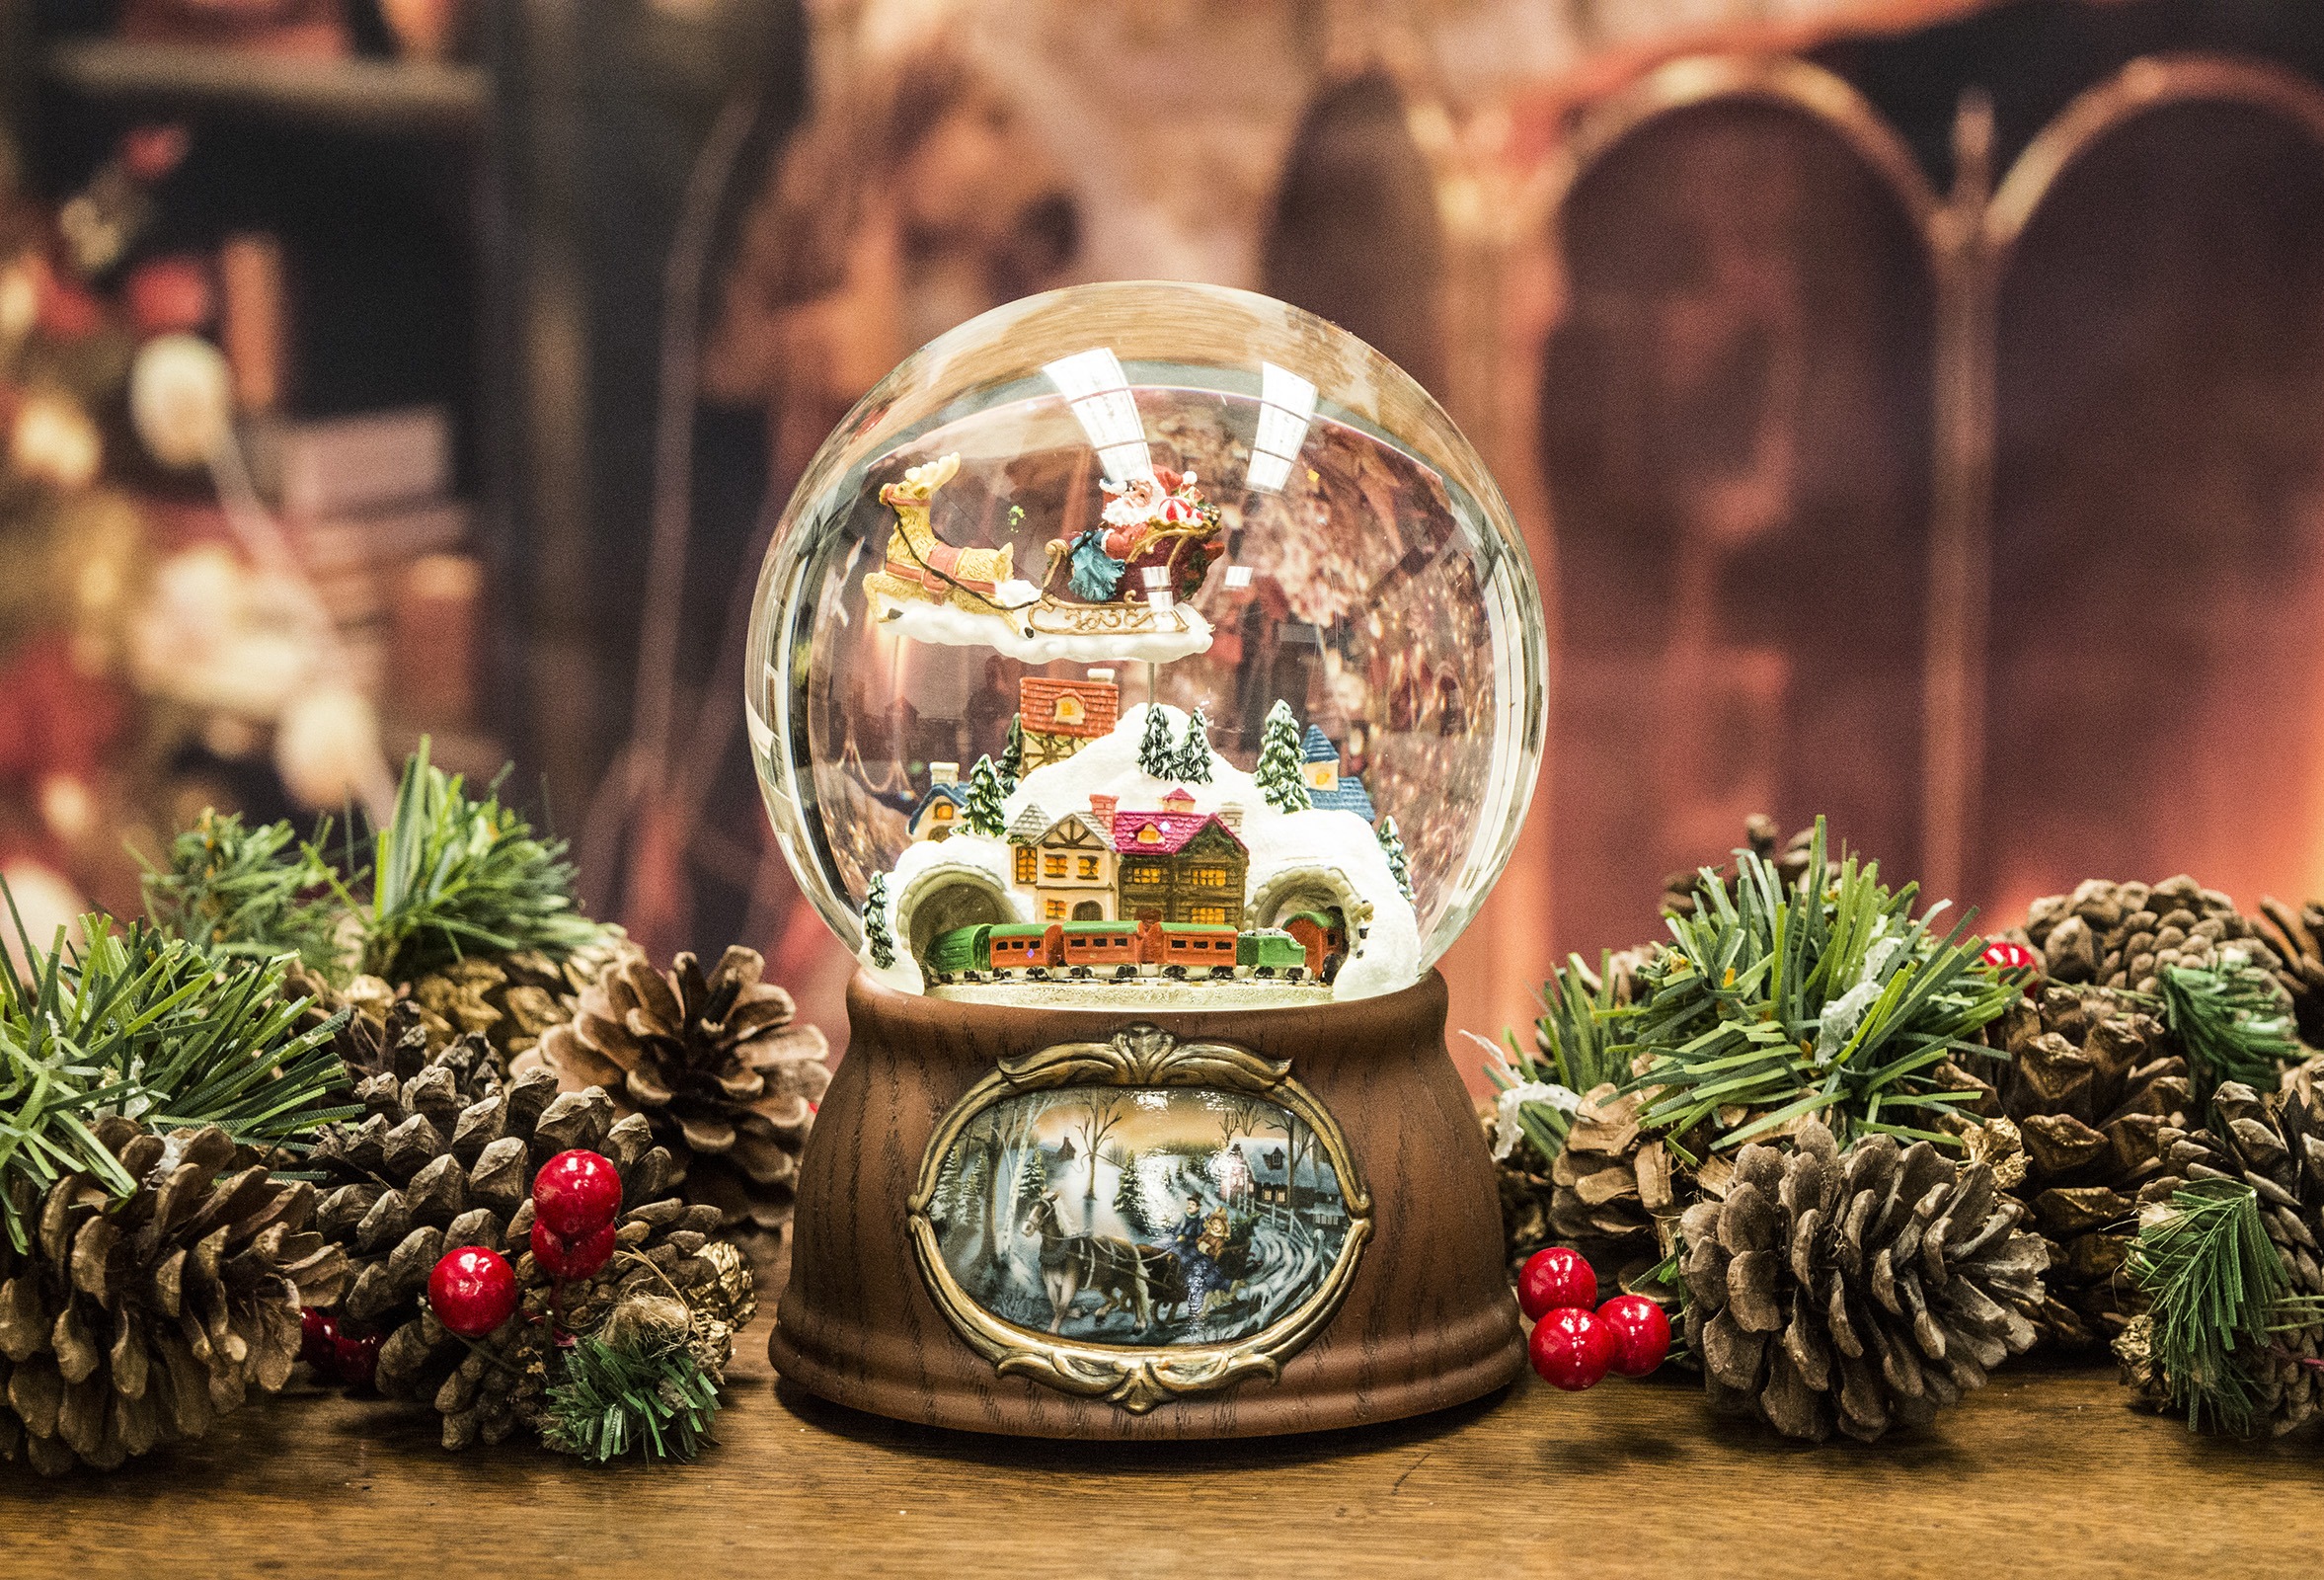 🎄 Decorate Your House for Christmas and We’ll Give You a Hot Celeb to Kiss Under the Mistletoe snow globe